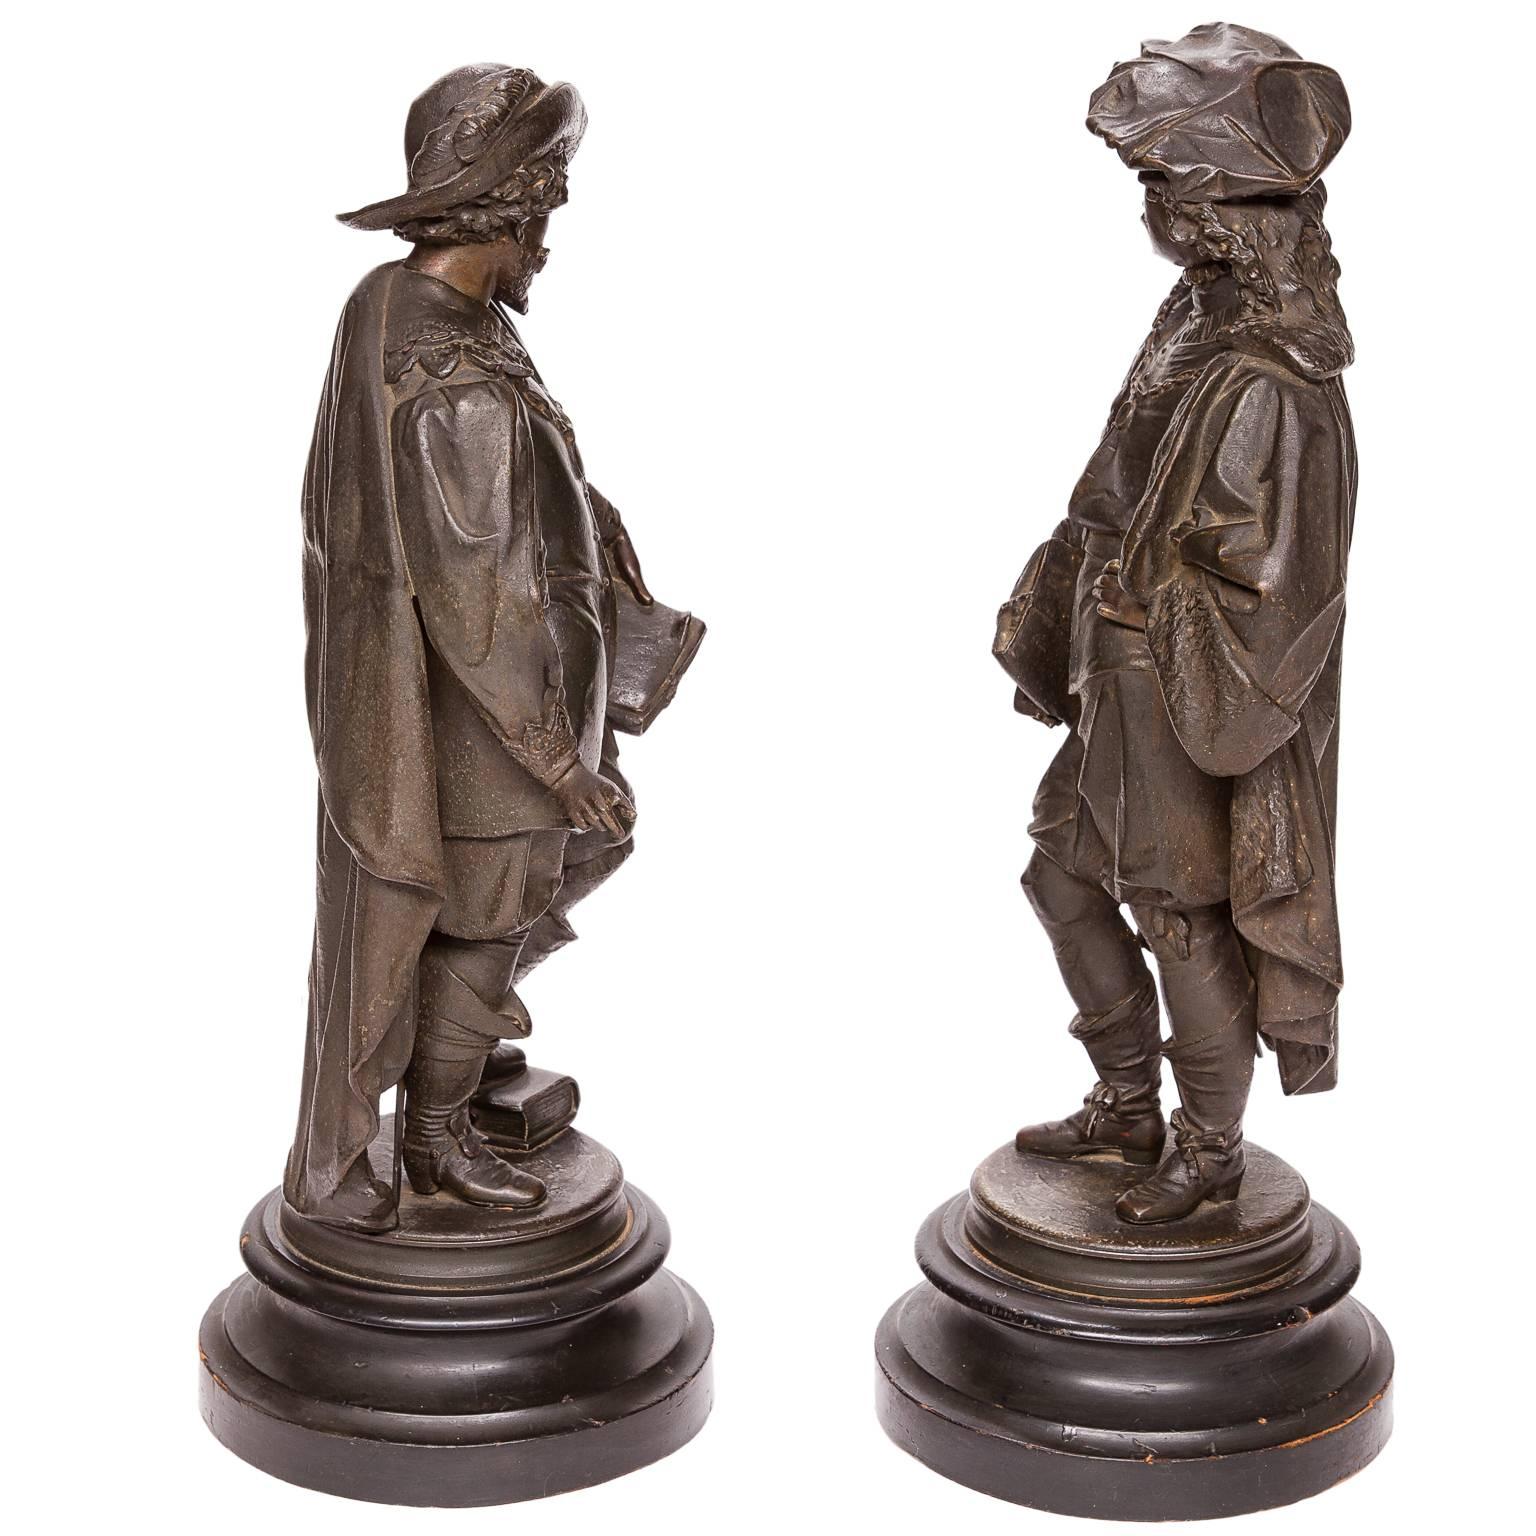 A pair of English Renaissance figures in spelter metal, circa 1890.
Notice: The great detail captured in these fine examples from the 19th century. 

